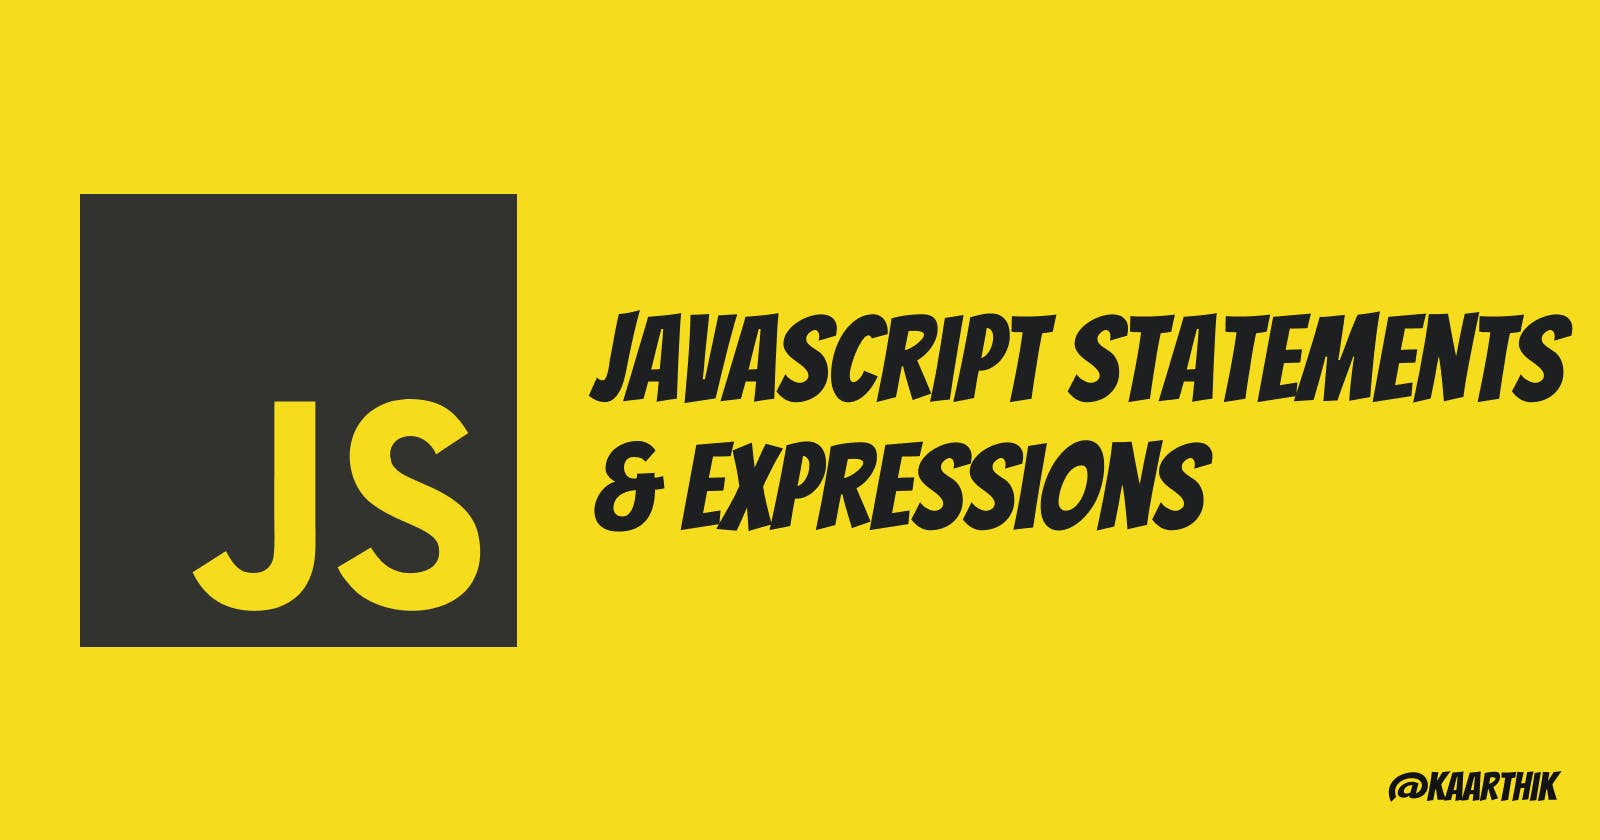 JavaScript Statements & Expressions Explained